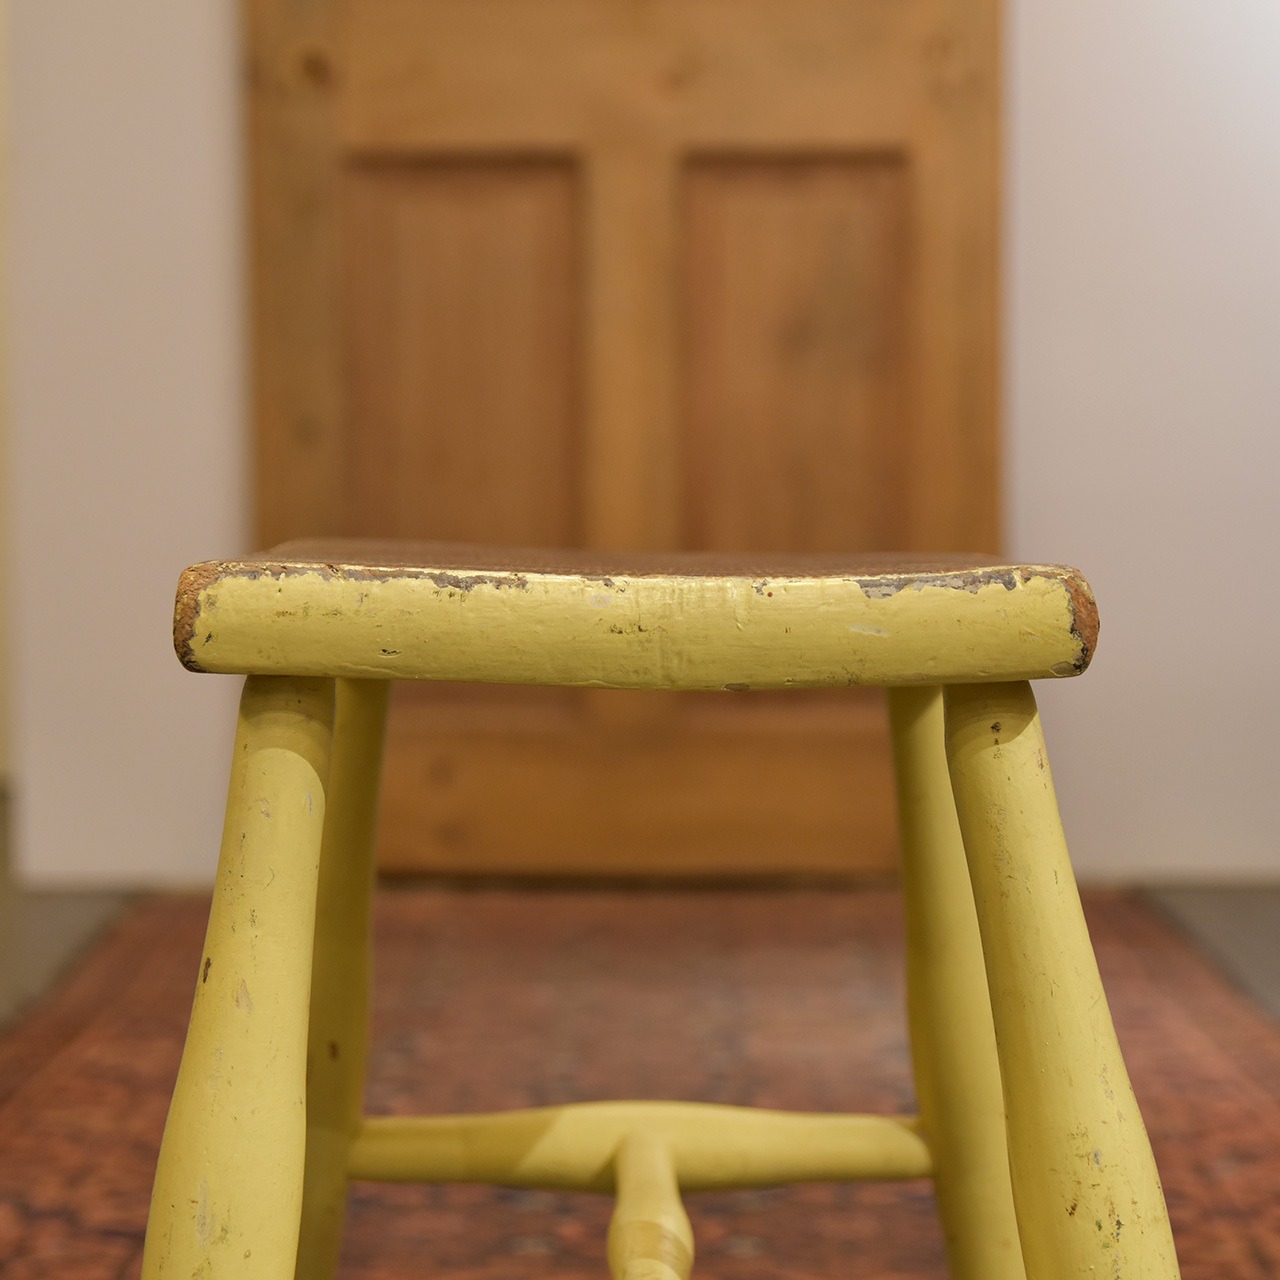 Painted Stool / ペイント スツール / 1911-0130